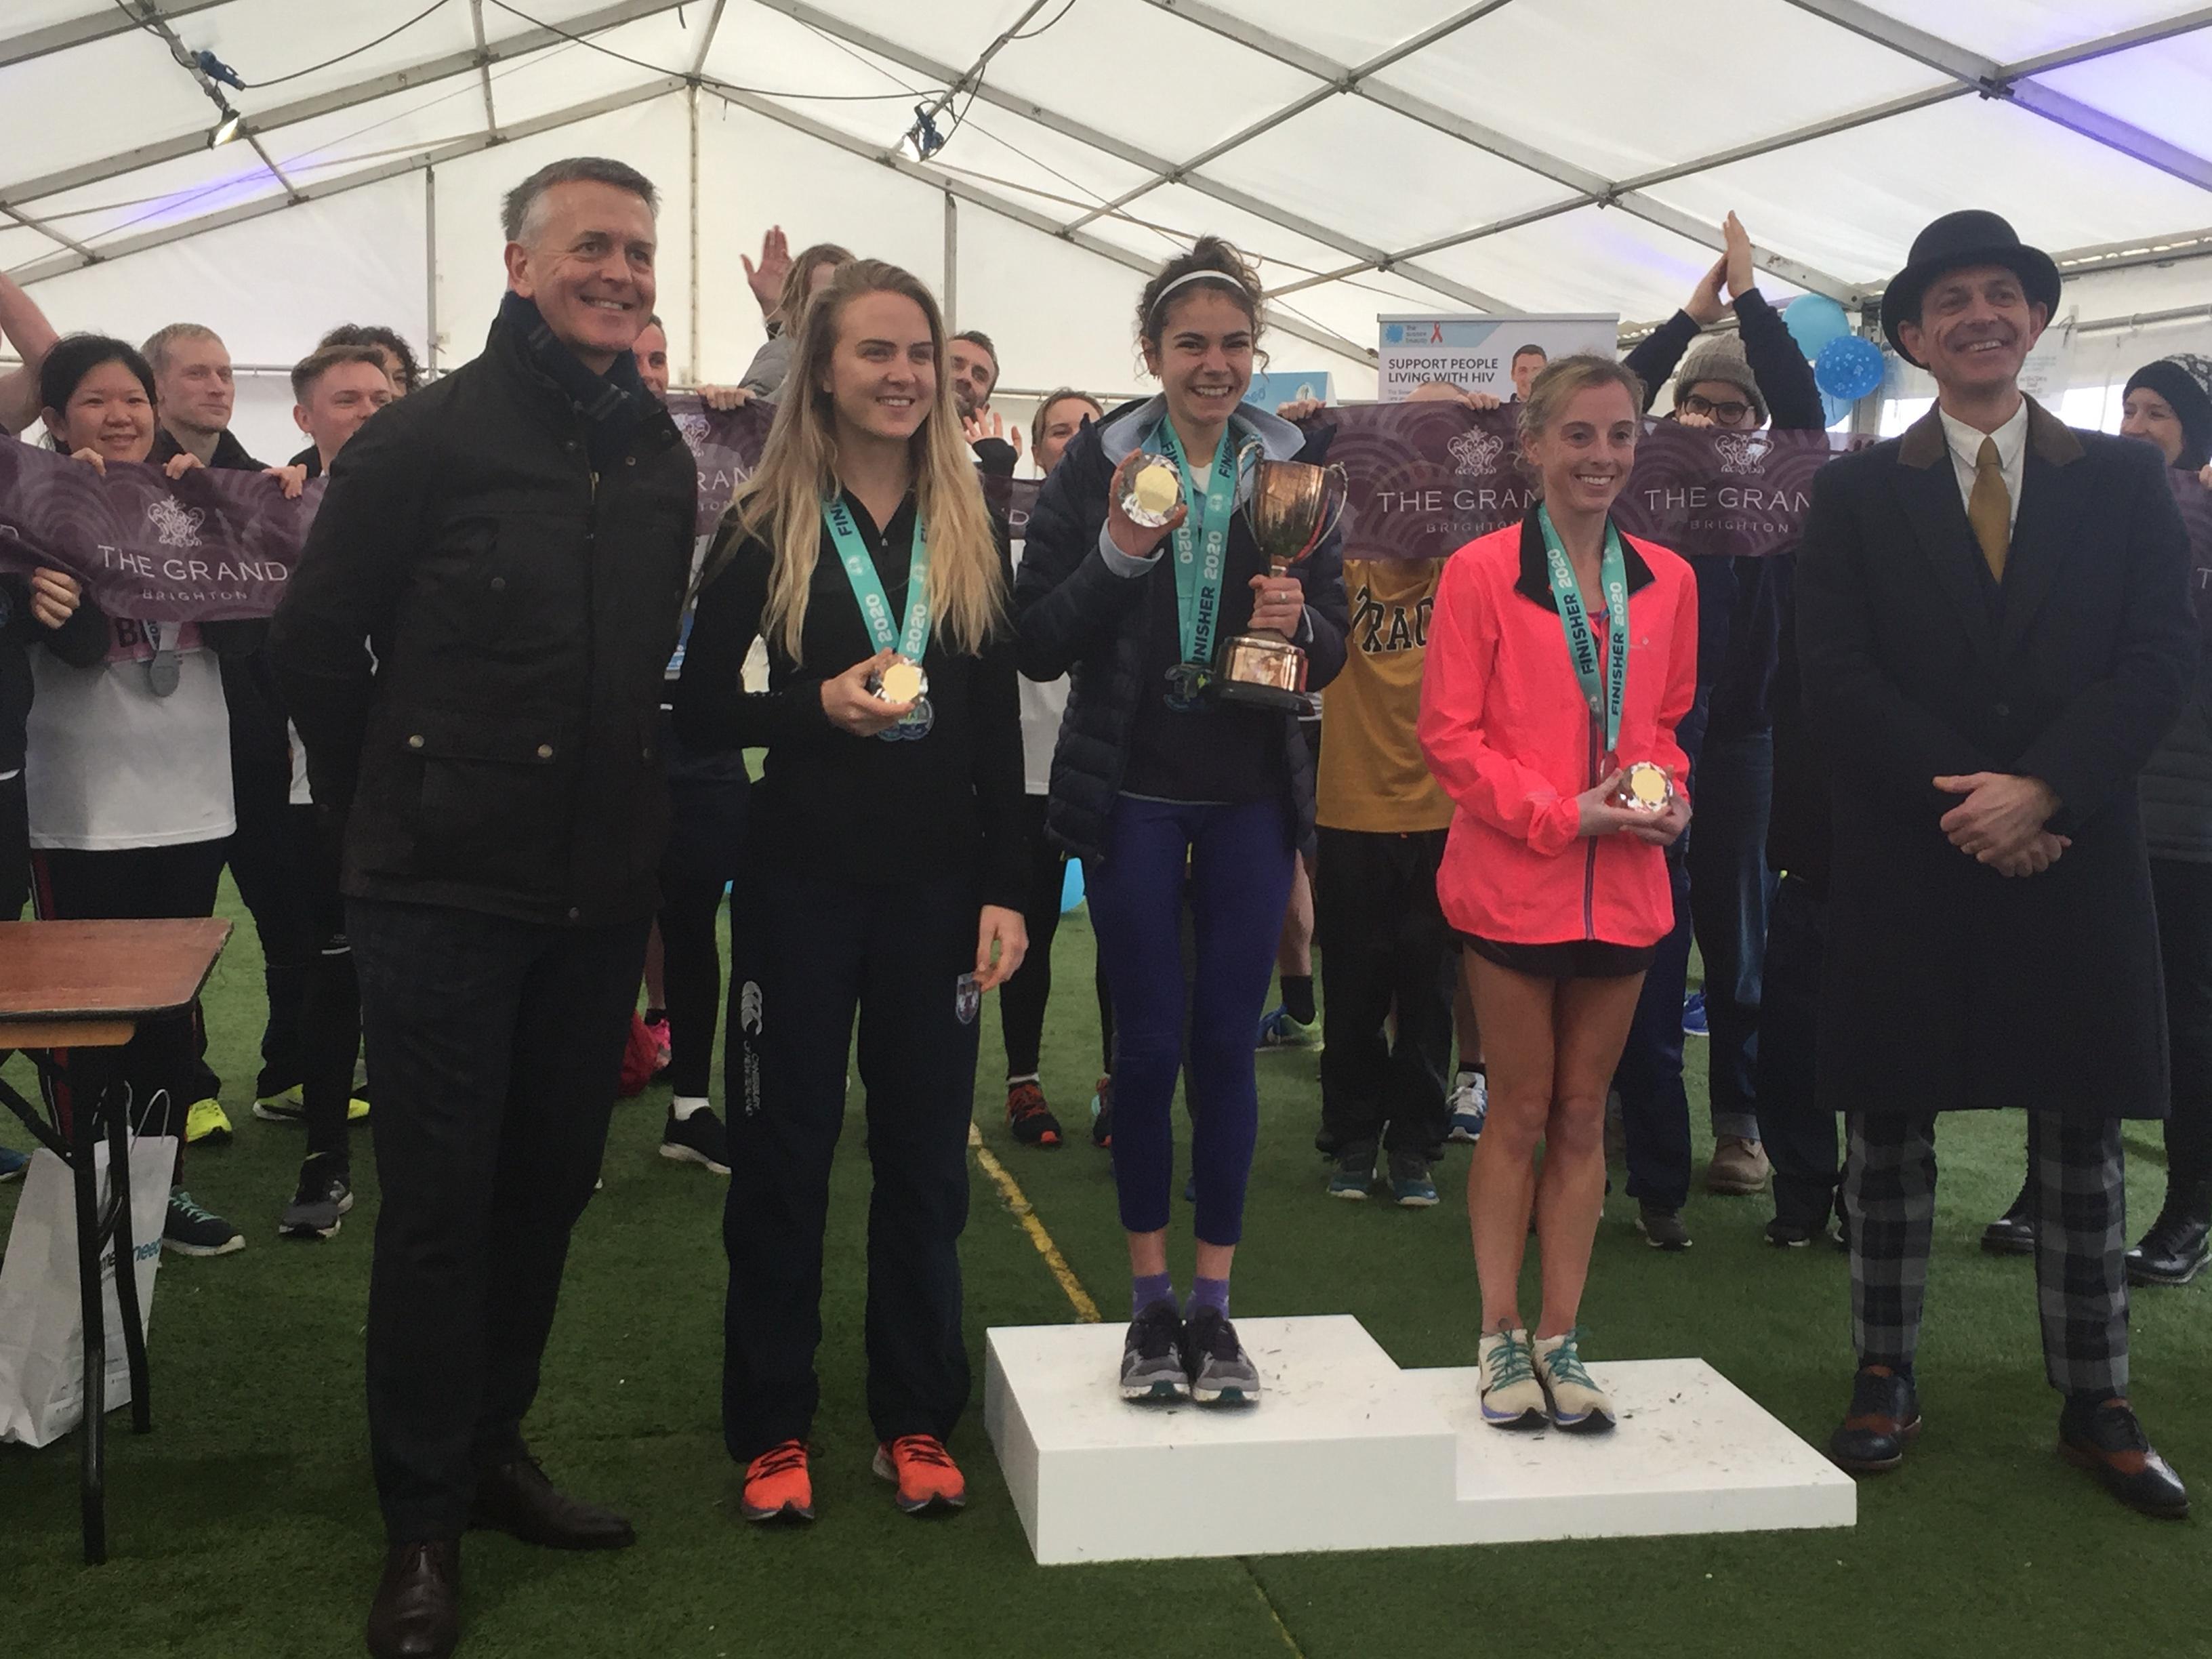 Left to right: general manager of The Grand, Andrew Mosley, women's race third place, Maisie Trafford, first place, Phillipa Williams, second place, Heather Noone